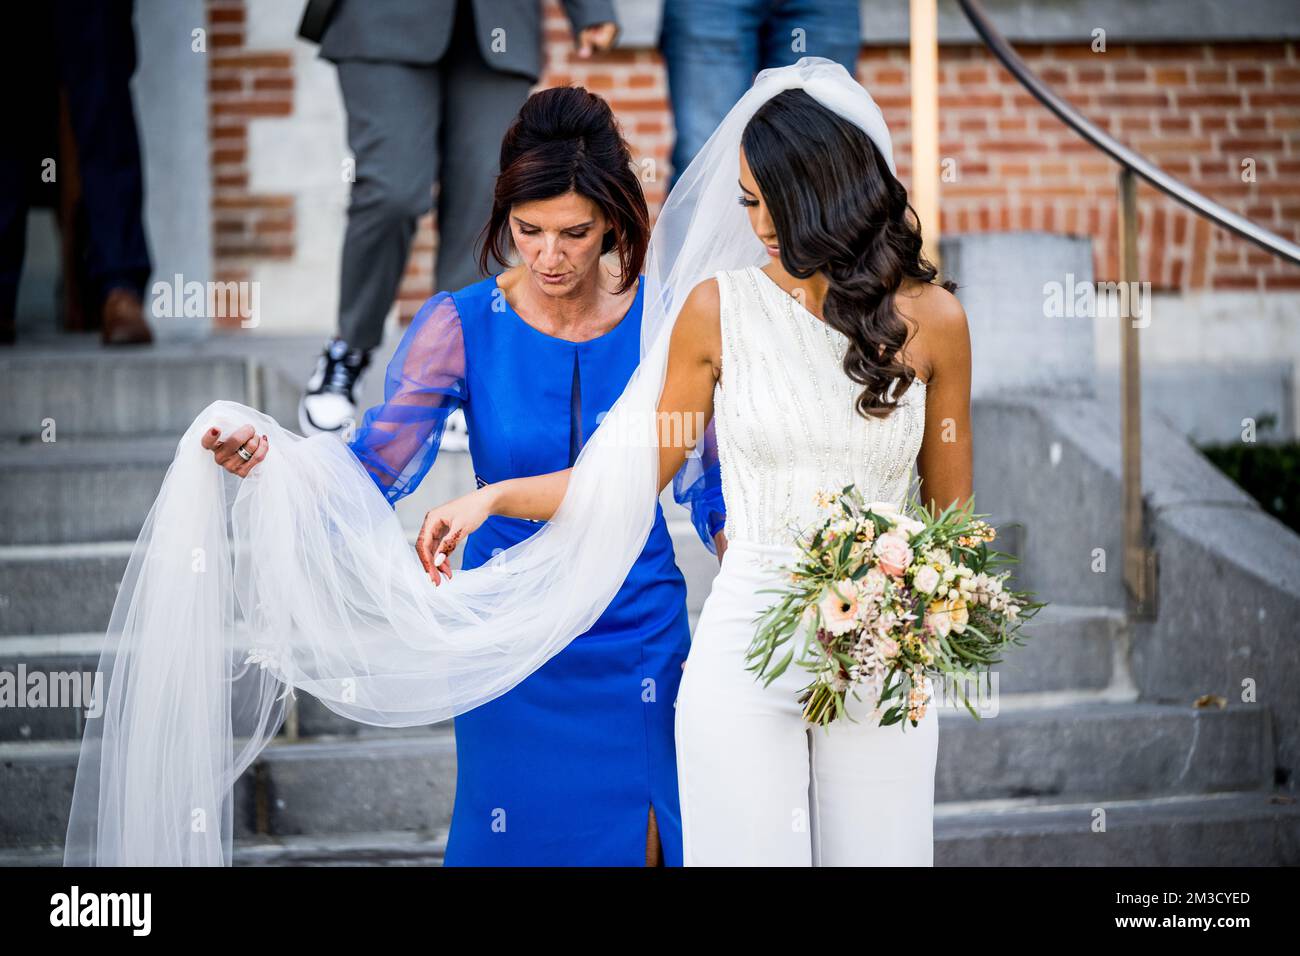 Remco's mother Agna Van Eeckhout helps Evenepoel's partner Oumaima Oumi Rayane with the long veil, ahead of the wedding of Belgian cyclist Remco Evenepoel and Oumi Rayane, Sunday 02 October 2022 in Dilbeek, Belgium. BELGA PHOTO JASPER JACOBS  Stock Photo